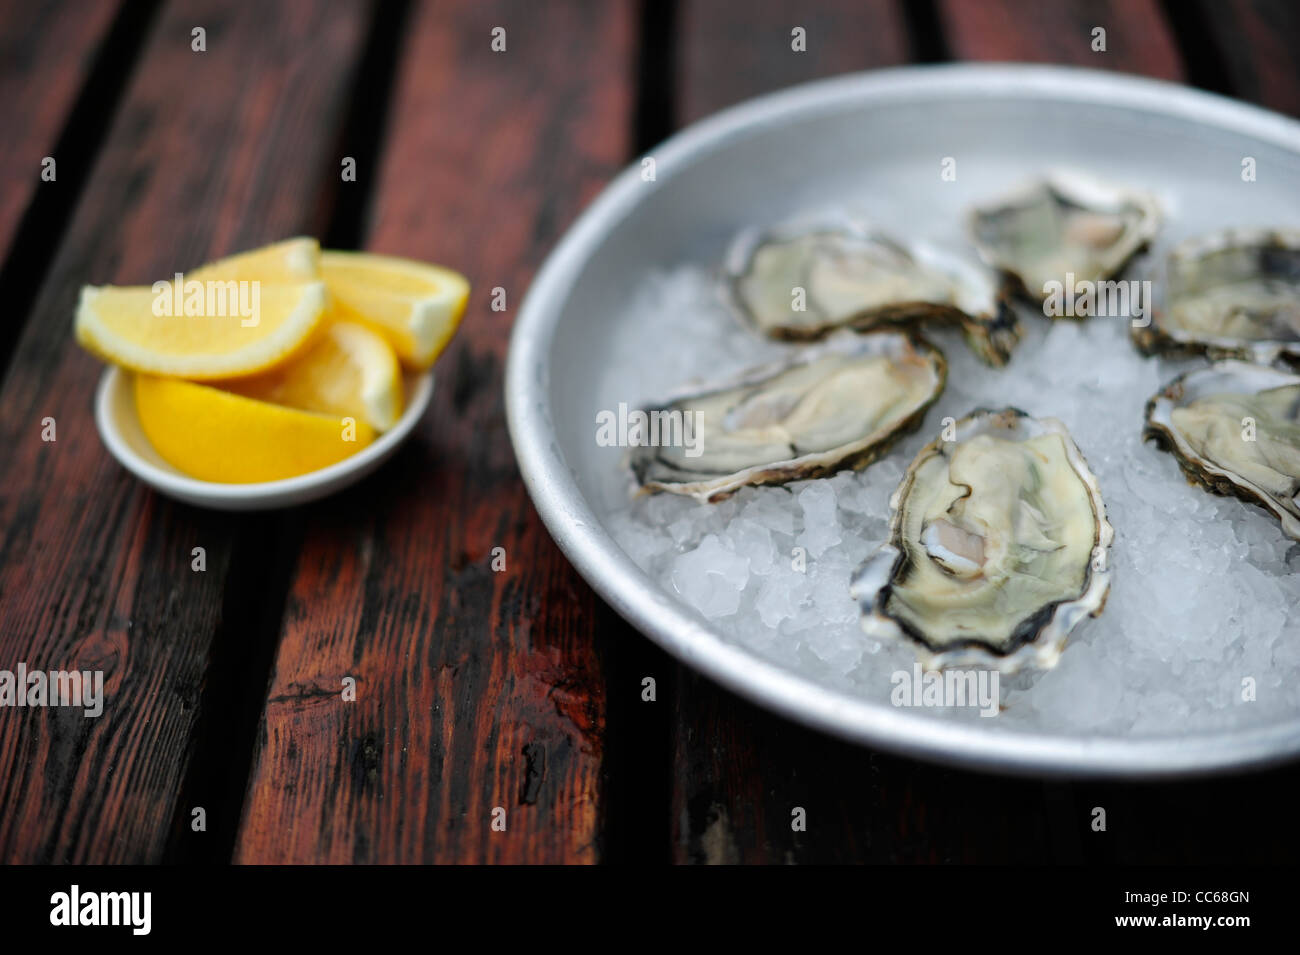 Fresh Oysters pictured on a plate Stock Photo